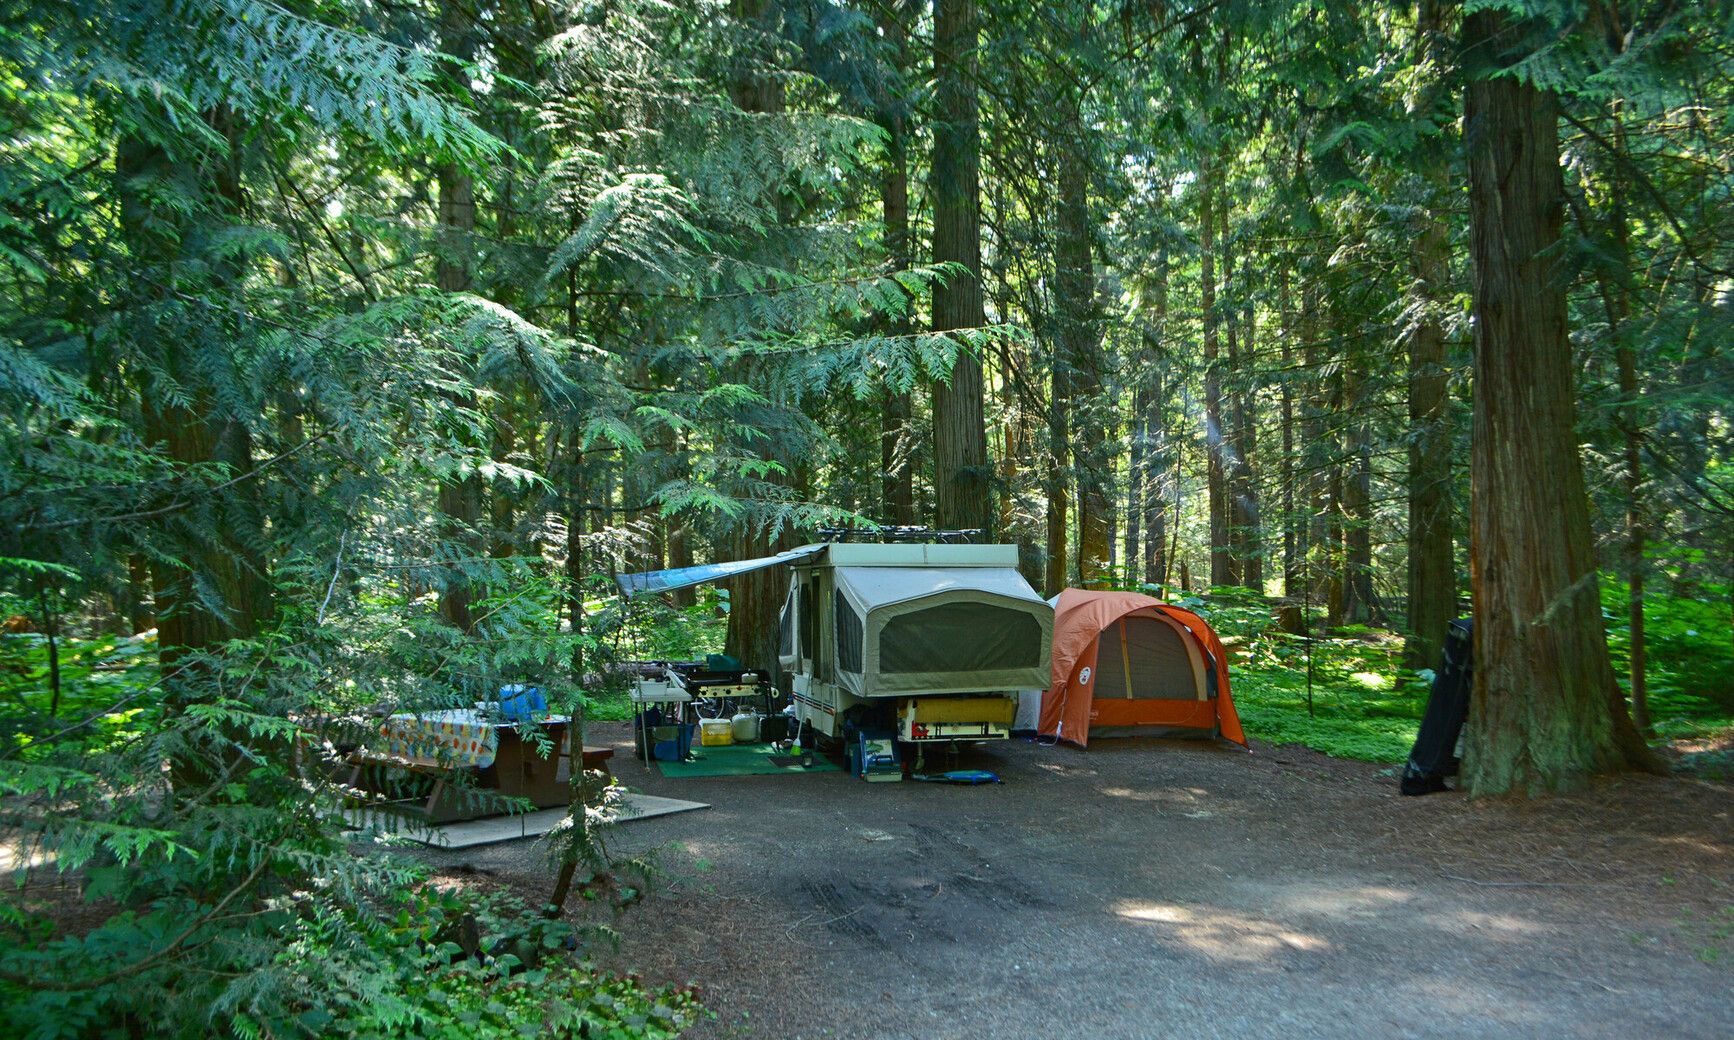 Escape to nature with spacious campsites nestled amidst the towering trees of Kokanee Creek Park.